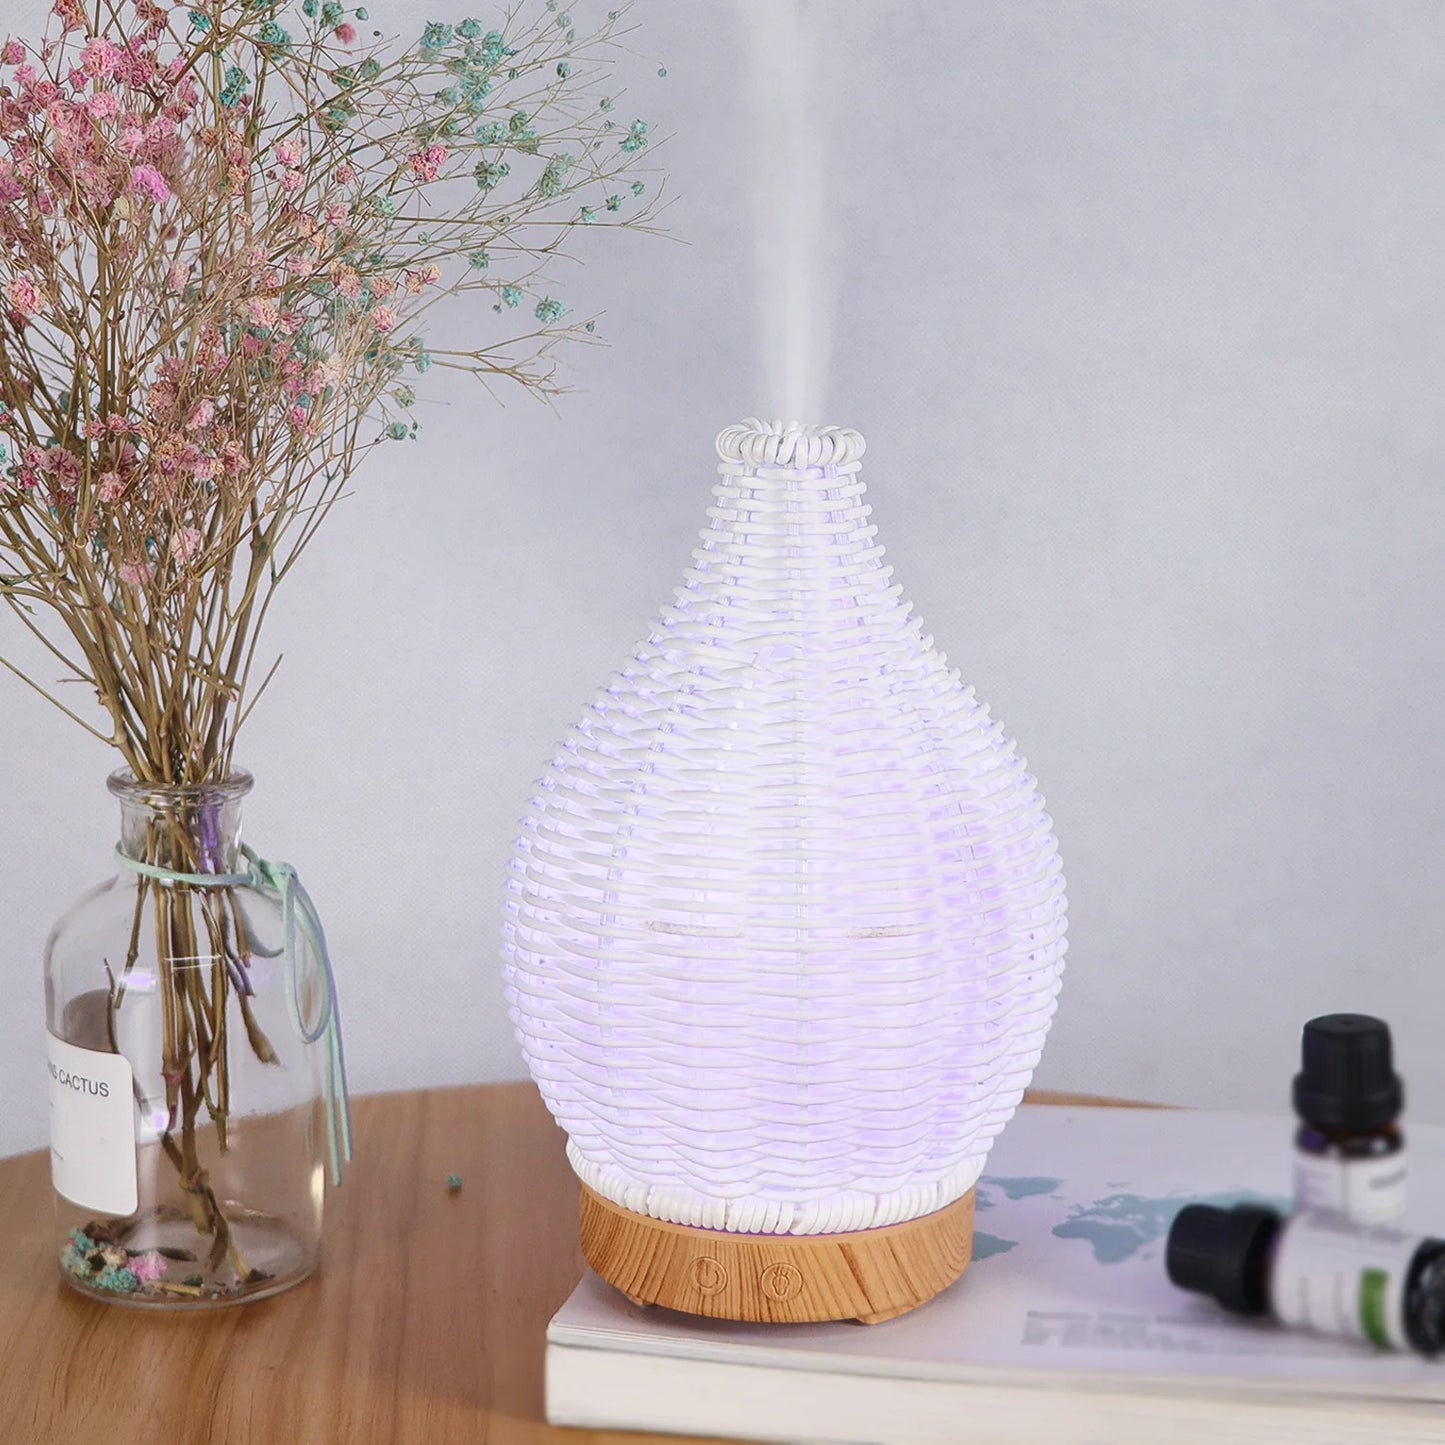 Wood Weave Mini Vase Air Humidifier USB Electronic Ultrasonic Water Fragrance Essential Oil Diffuser Home Room Fragrance